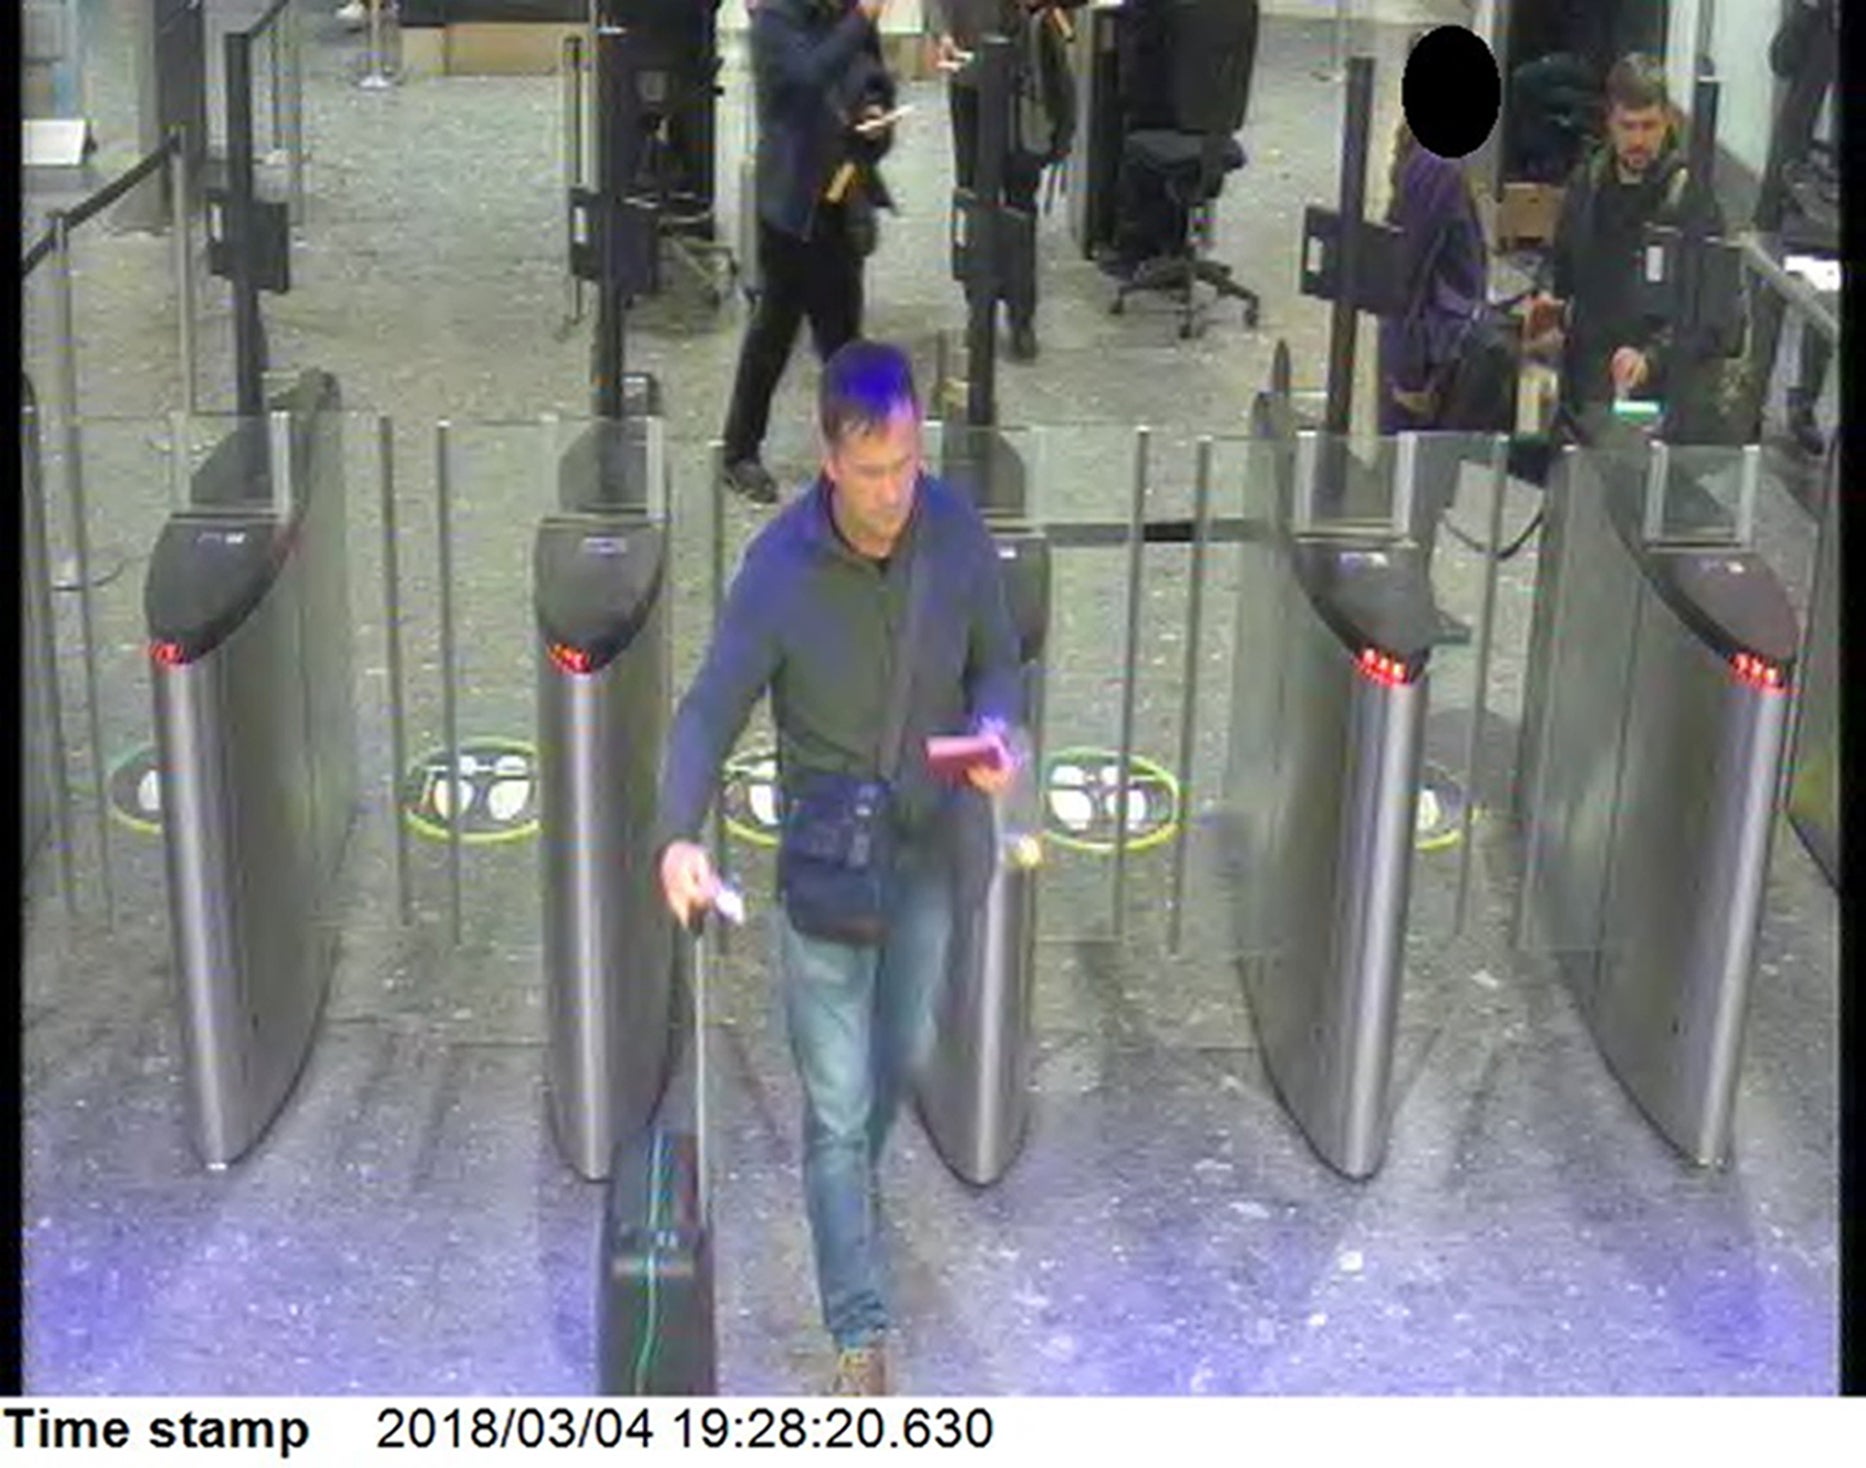 The suspects at Heathrow airport before they left the UK on 4 March